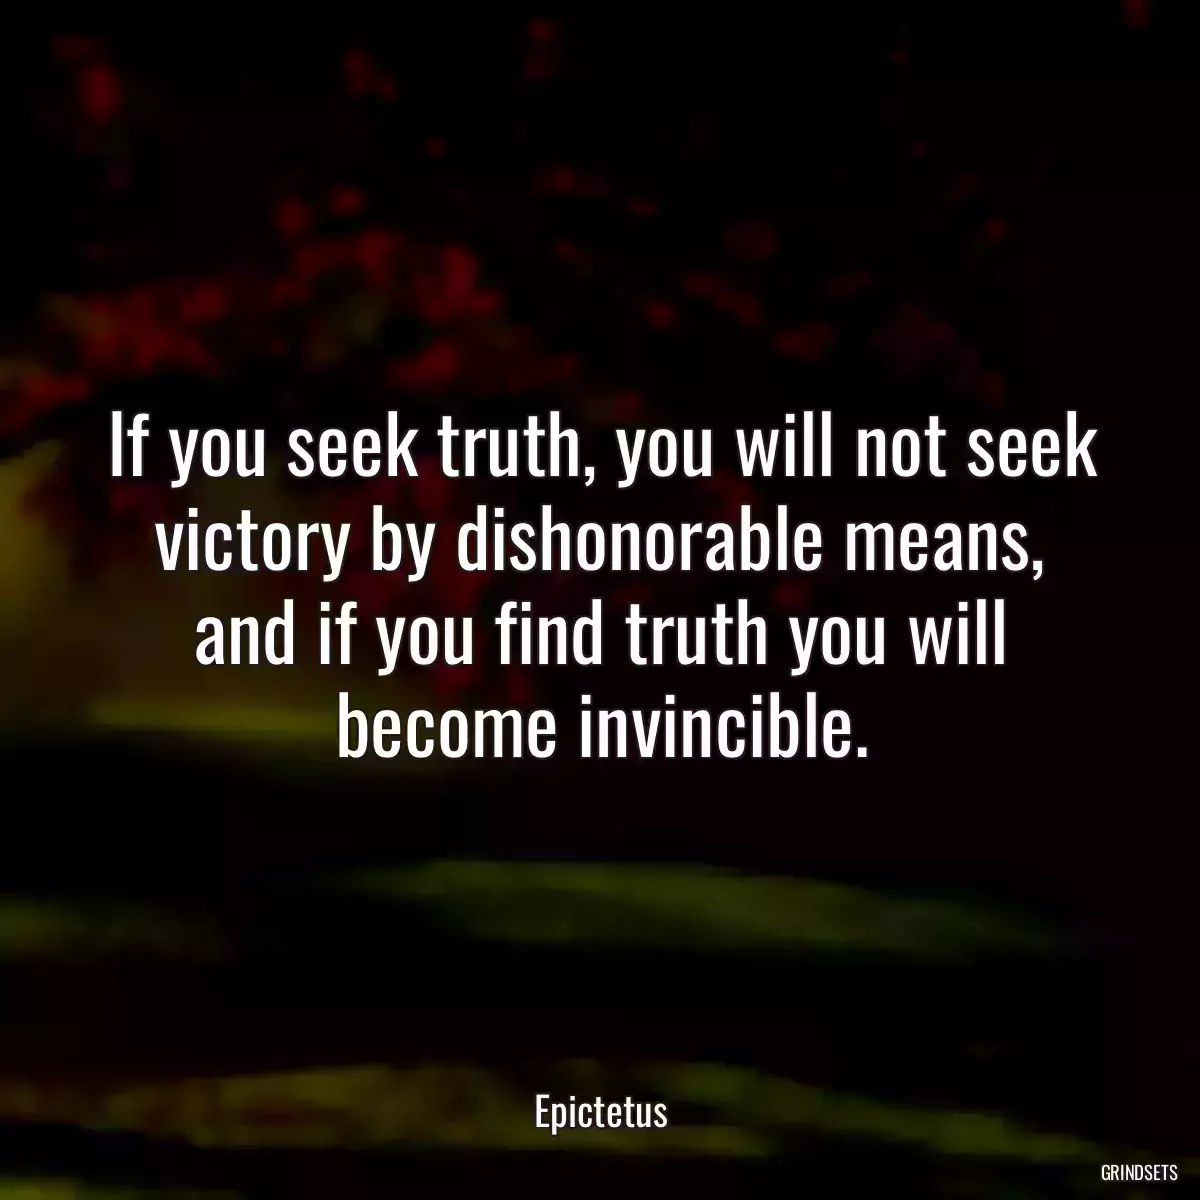 If you seek truth, you will not seek victory by dishonorable means, and if you find truth you will become invincible.